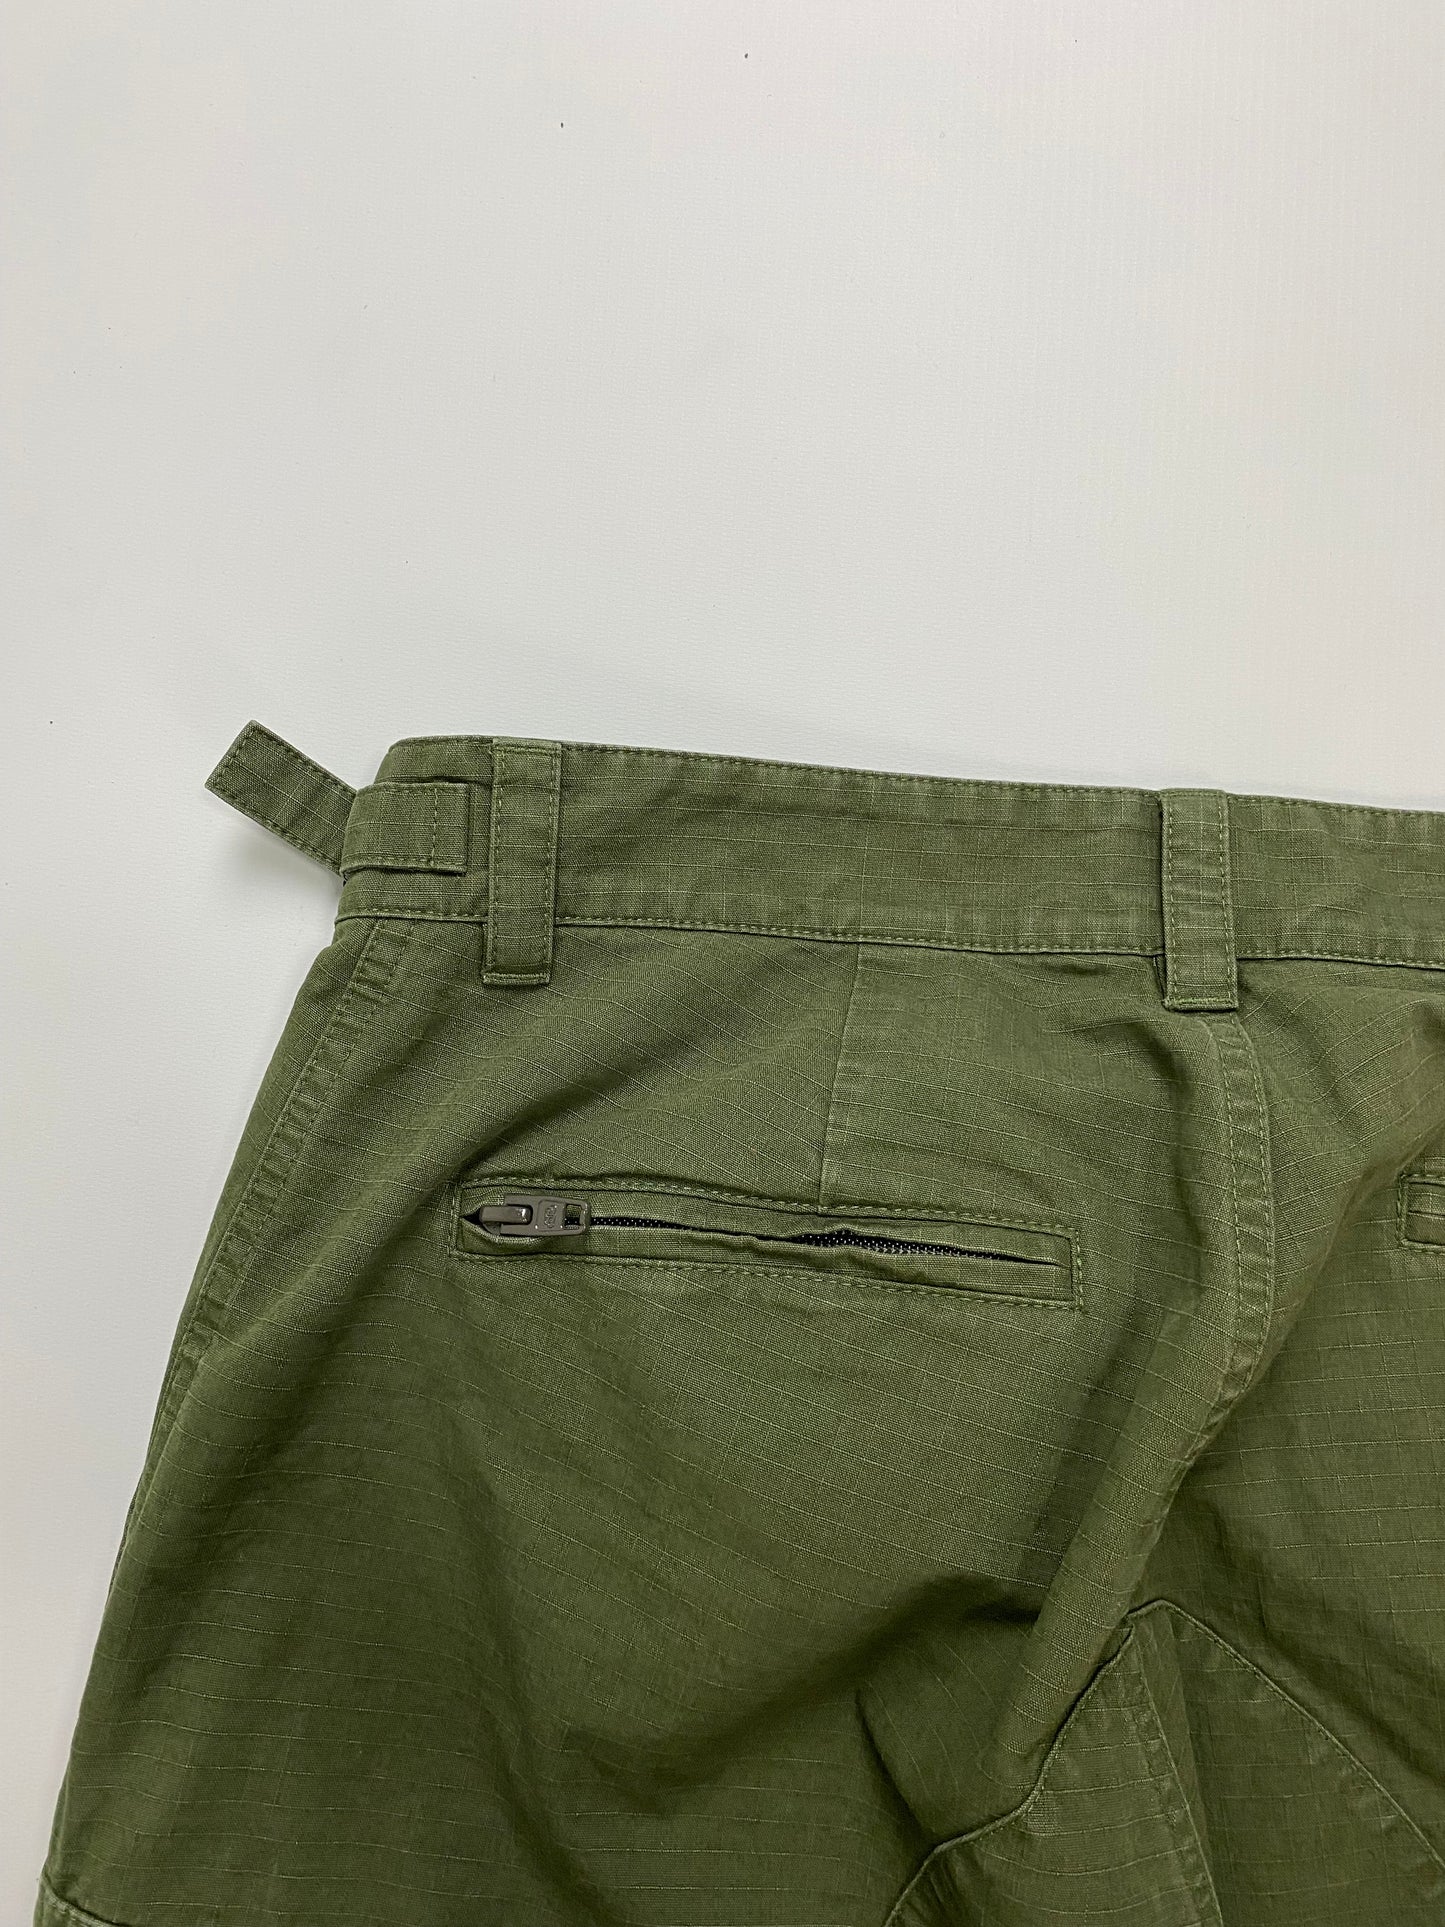 Balenciaga AW22 lost Tape pulled cargo pants in olive green SZ:48